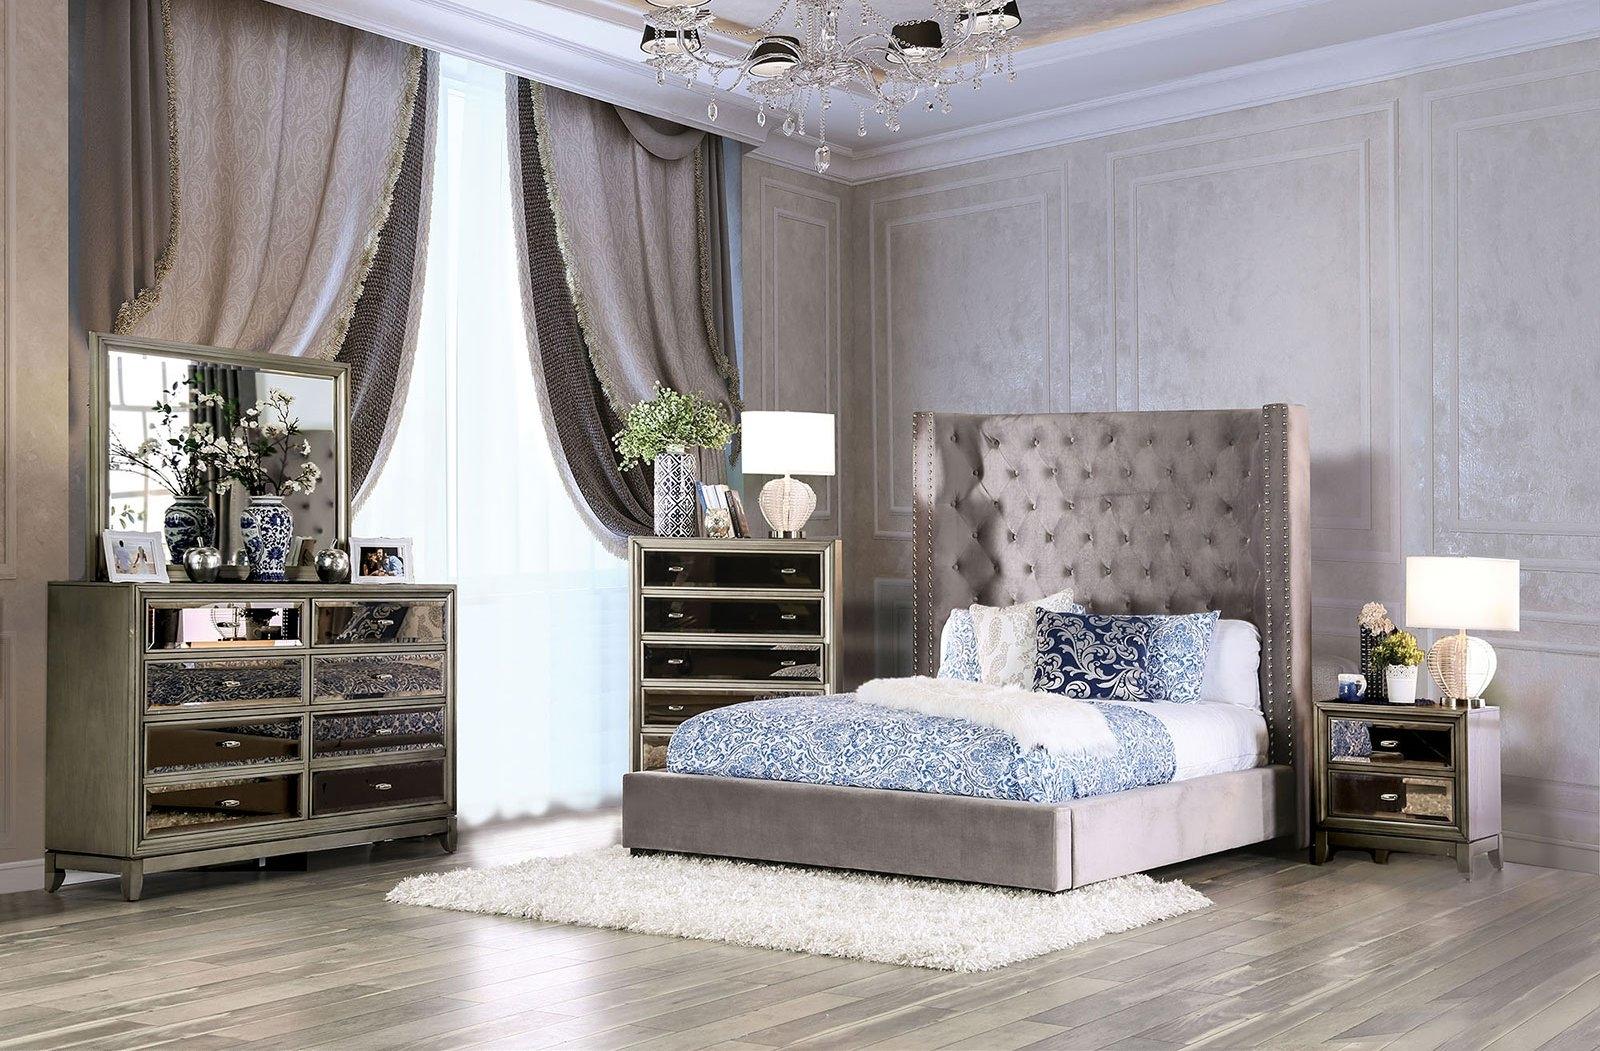 https://nyfurnitureoutlets.com/products/transitional-gray-solid-wood-queen-bedroom-set-5pcs-furniture-of-america-cm7679gy-mirabelle/2560x2560/393710-1-218328000501.jpg